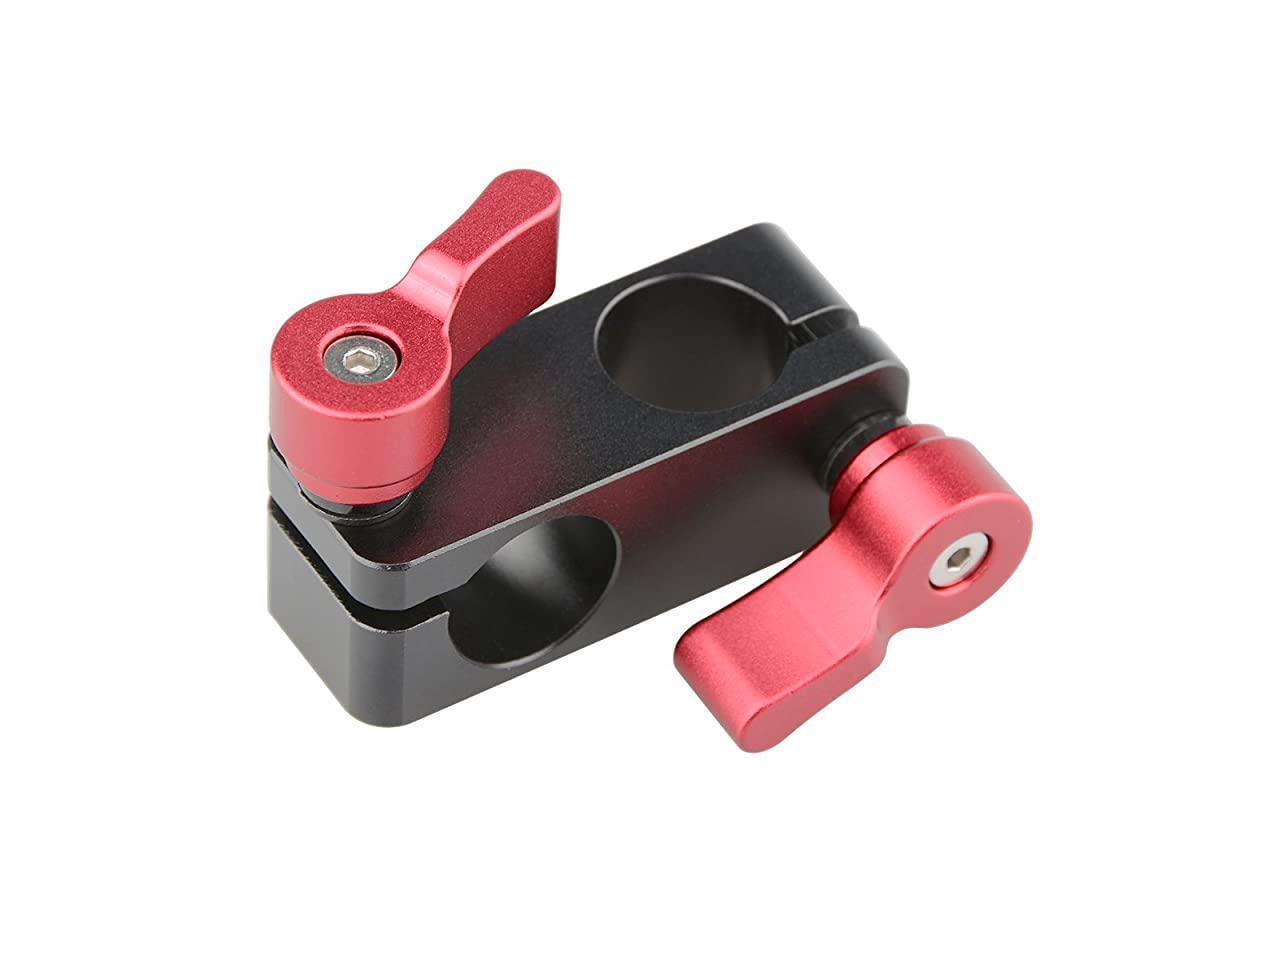 Right Angle Rod Clamp 15mm Rod 90 Degree Rotate for Video Camera DSLR ...